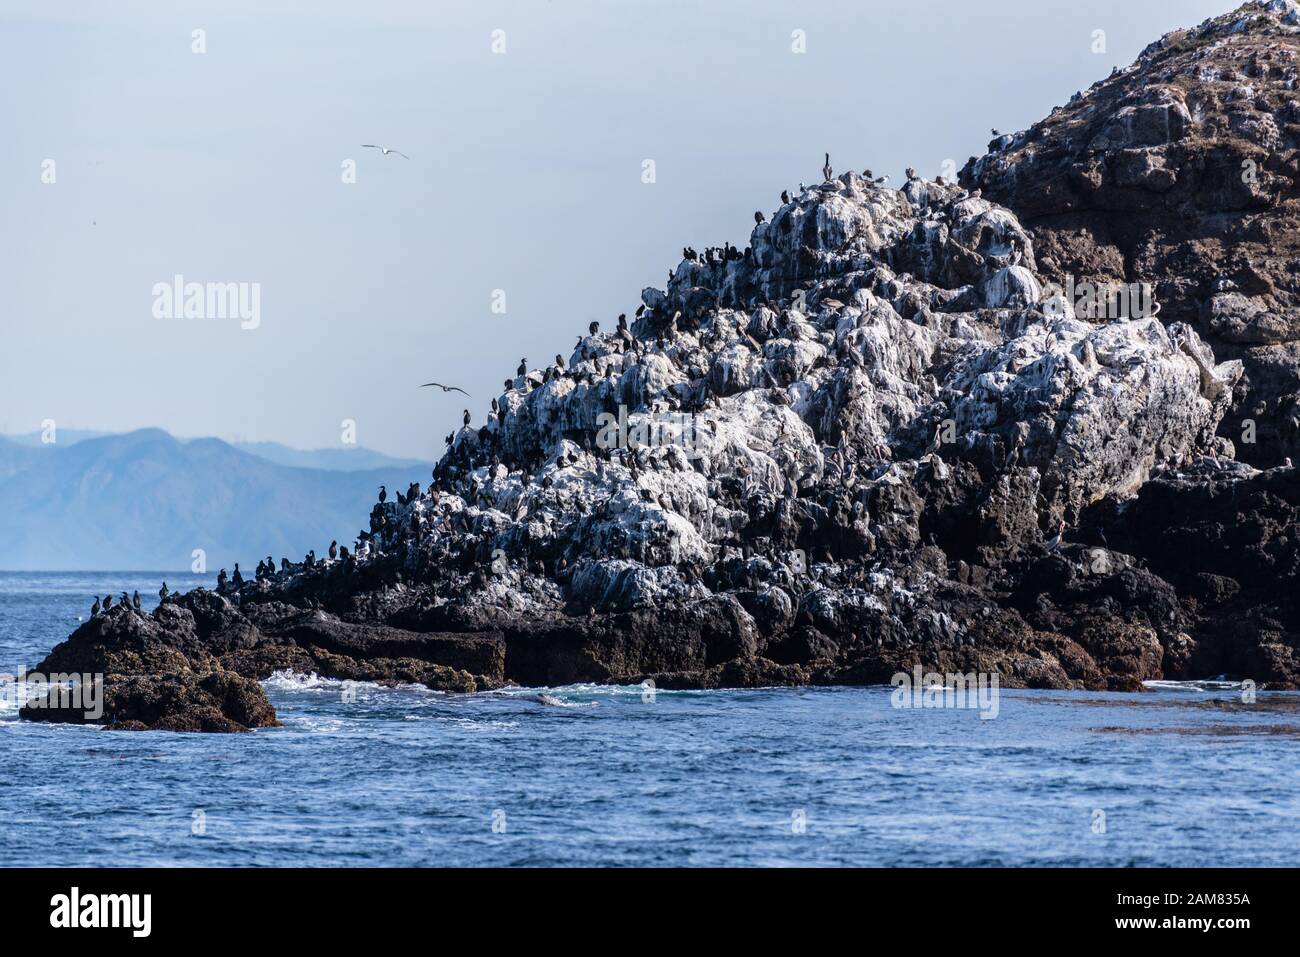 Anacapa Island, off the coast of Southern California, has a large population of Great Cormorant birds roosting on the volcanic rock on west end of isl Stock Photo